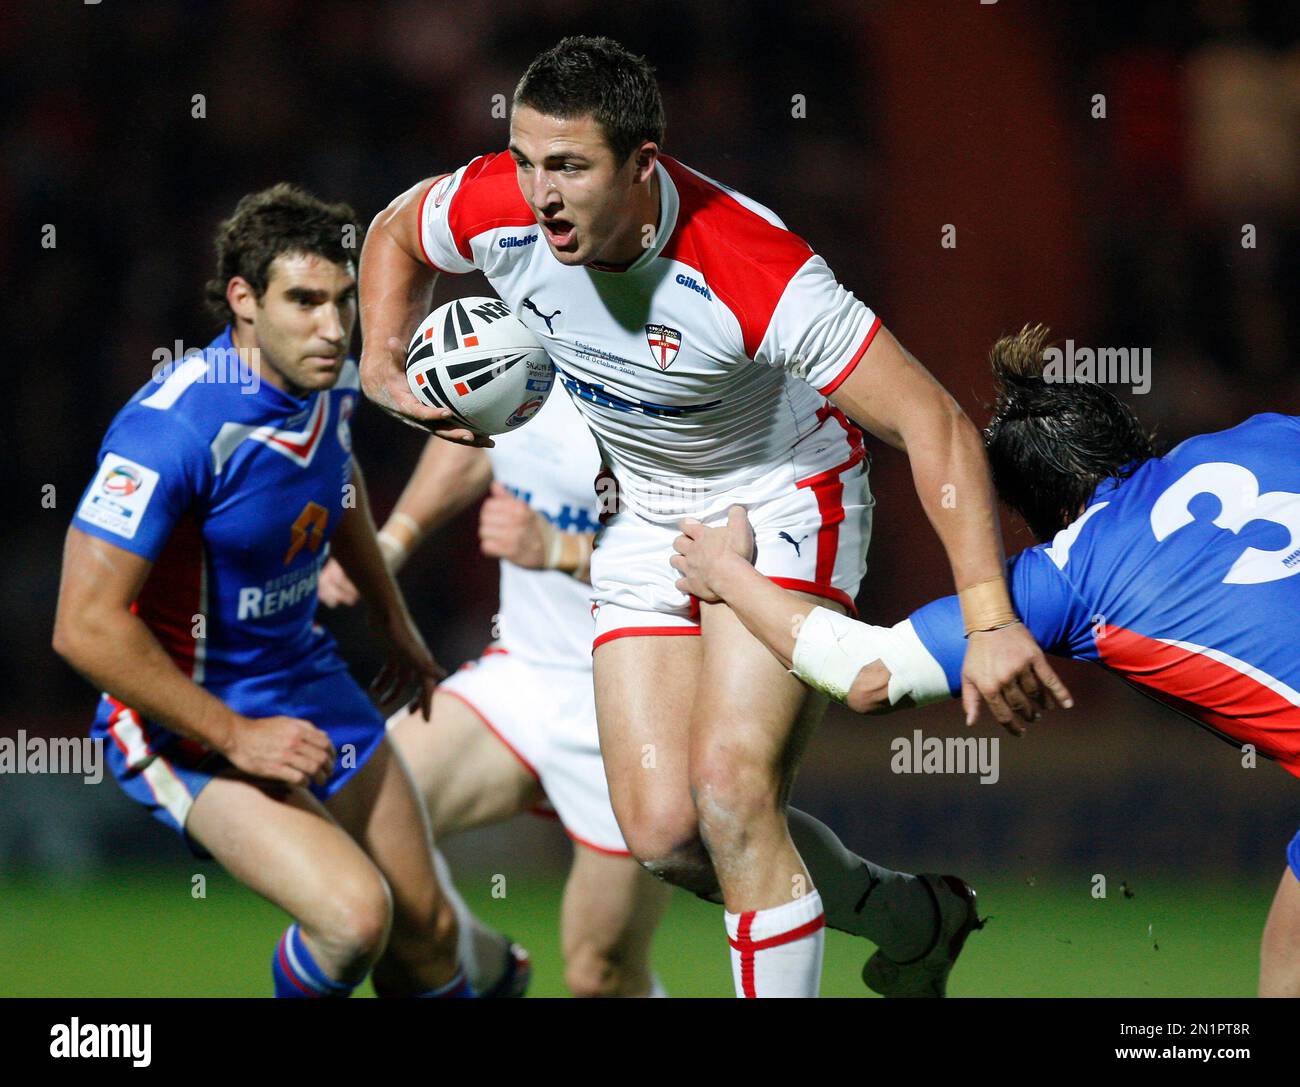 FILE- In this image dated Friday Oct. 23, 2009, England's Sam Burgess,  centre, is tackled by France's Sebastien Raguin, right, during their Four  Nations rugby league match at the Keepmoat Stadium, Doncaster,